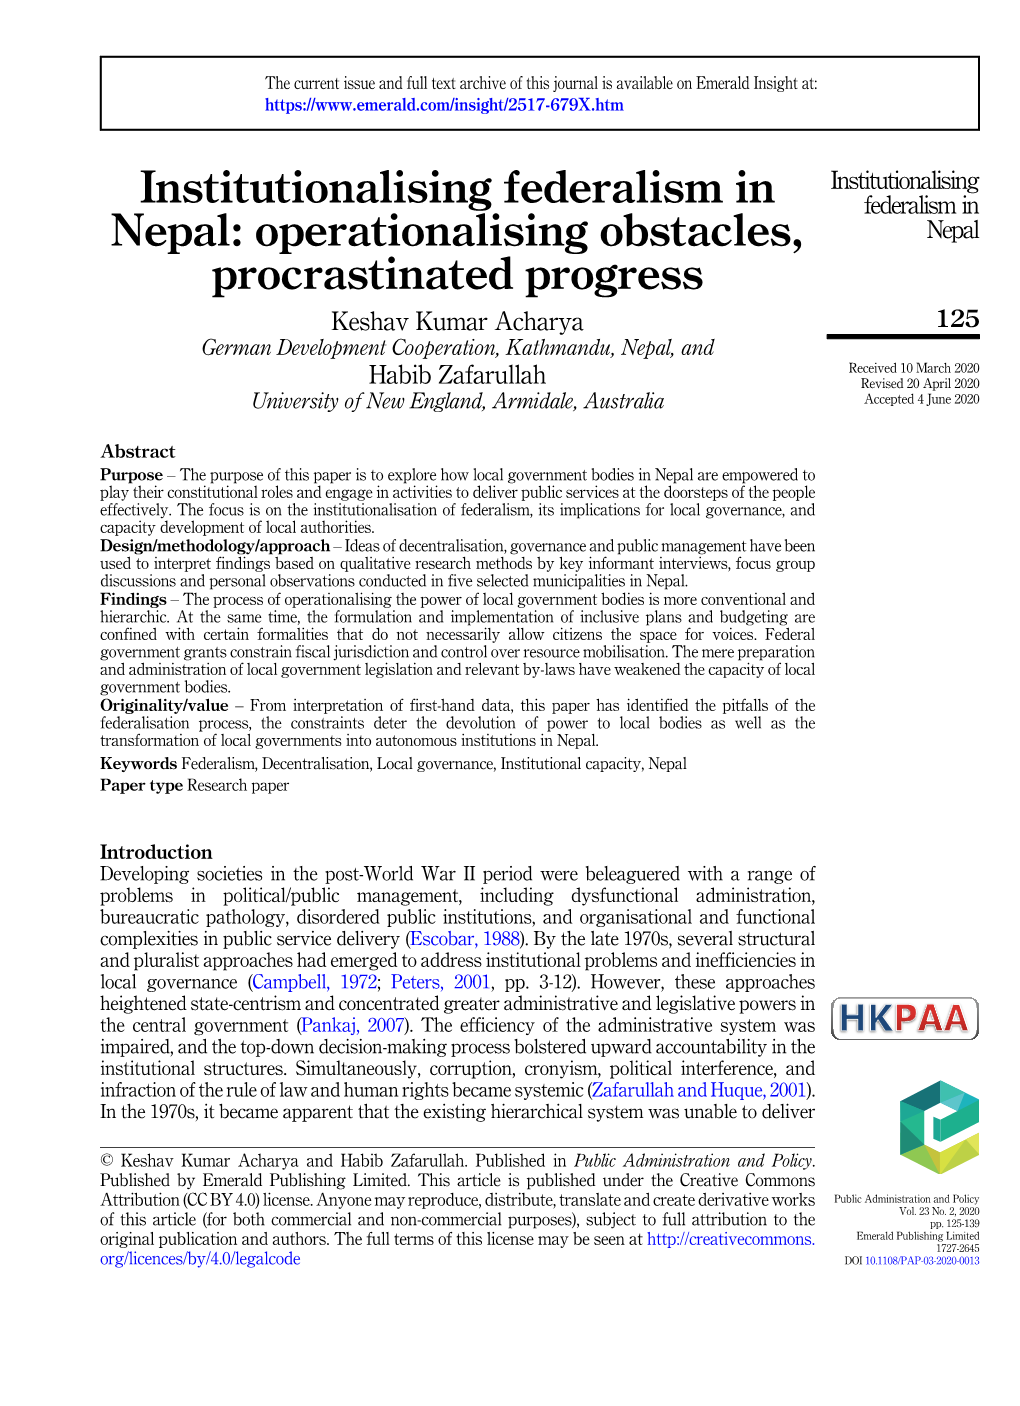 Institutionalising Federalism in Nepal: Operationalising Obstacles